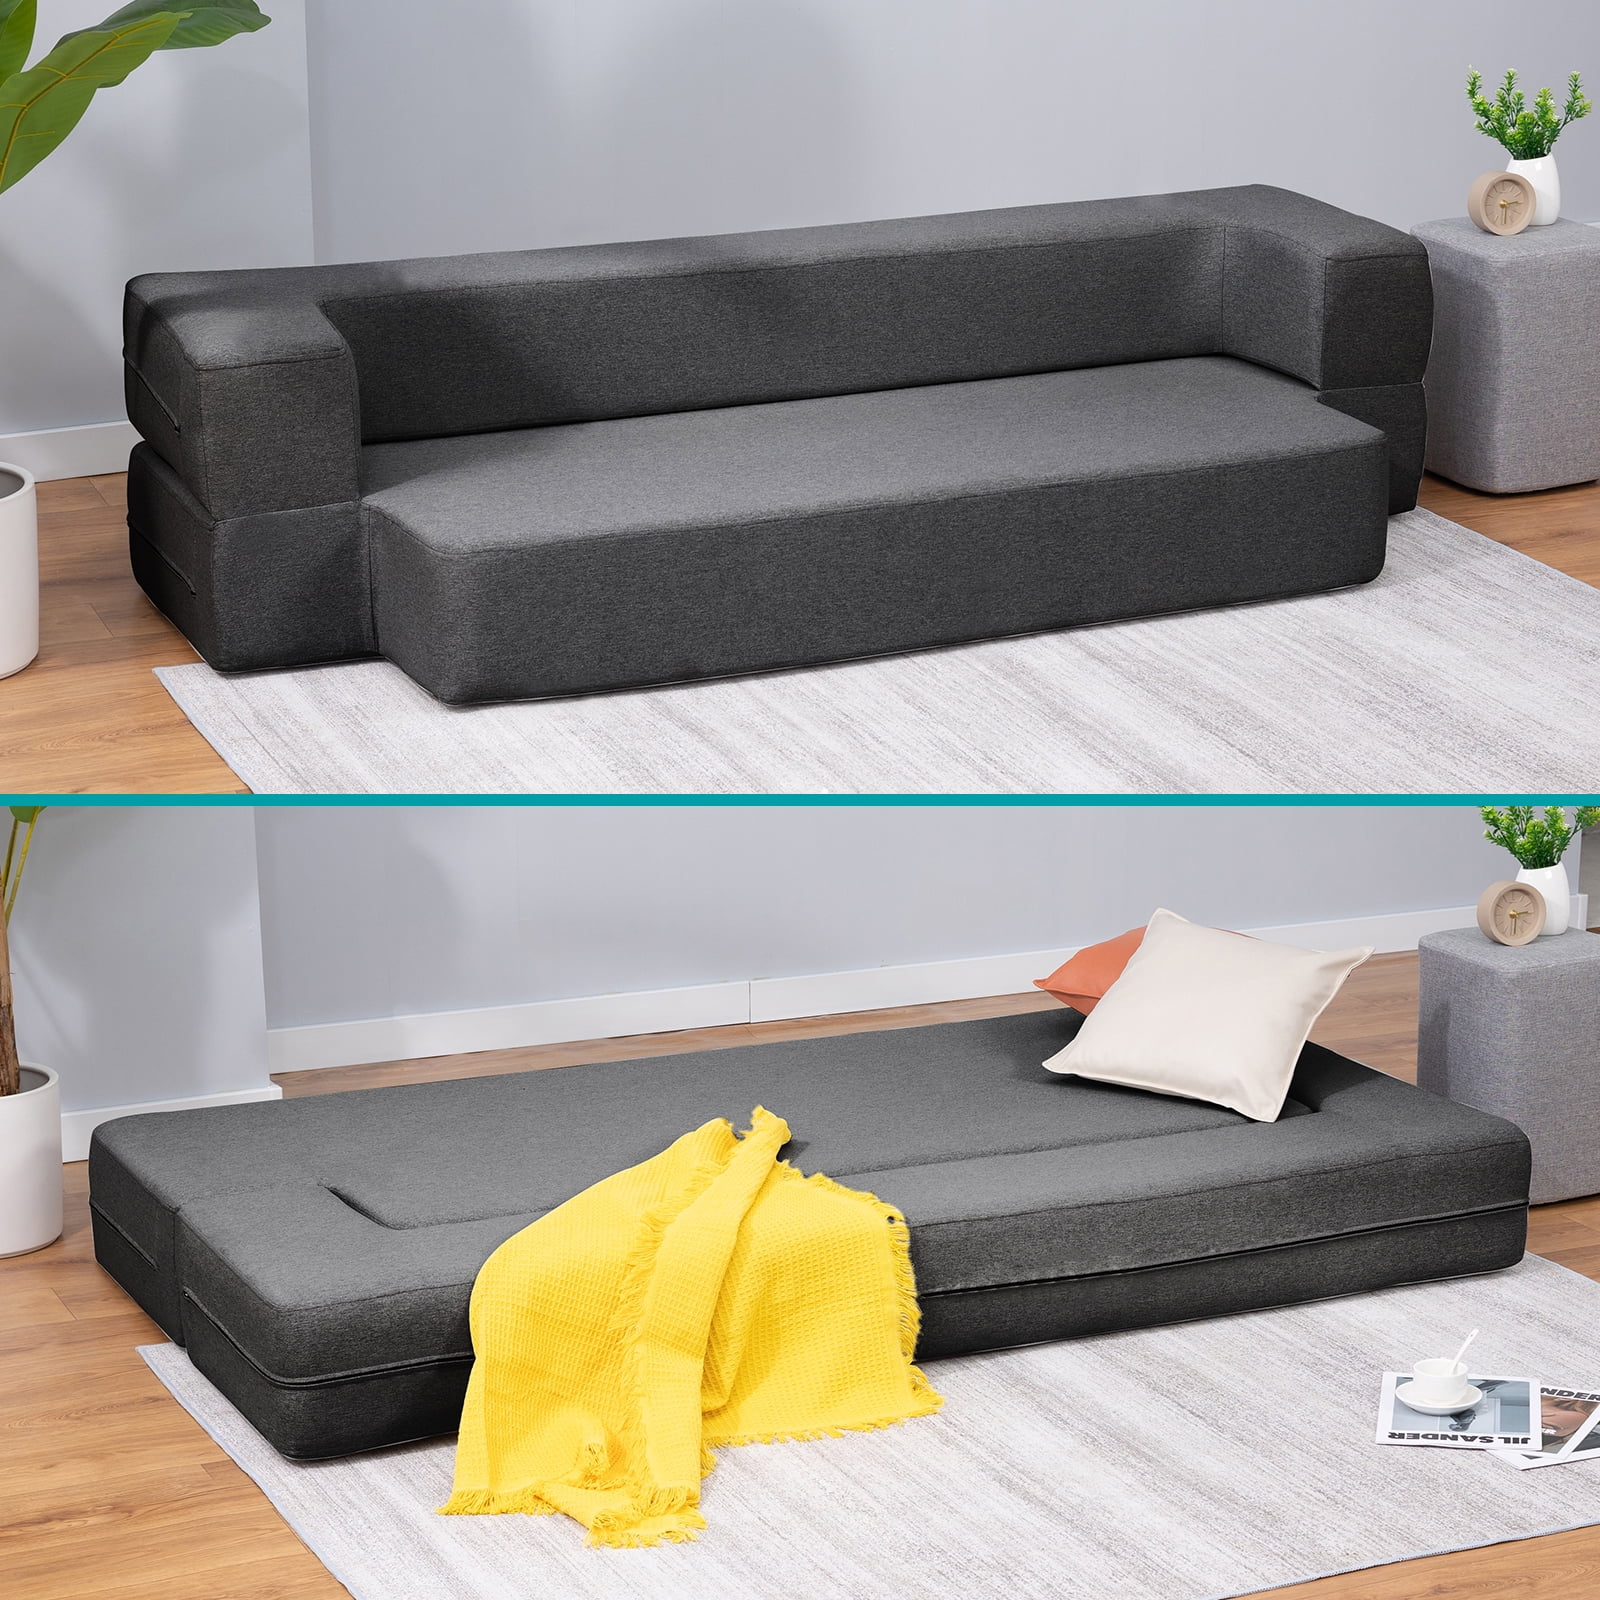 BALUS Folding Sofa Bed, Convertible Sleeper Sofa Bed Queen,Floor Couch  Bed,Futon Sofa Bed Memory Foam Mattress,Floor Sofa Bed Twin for Living